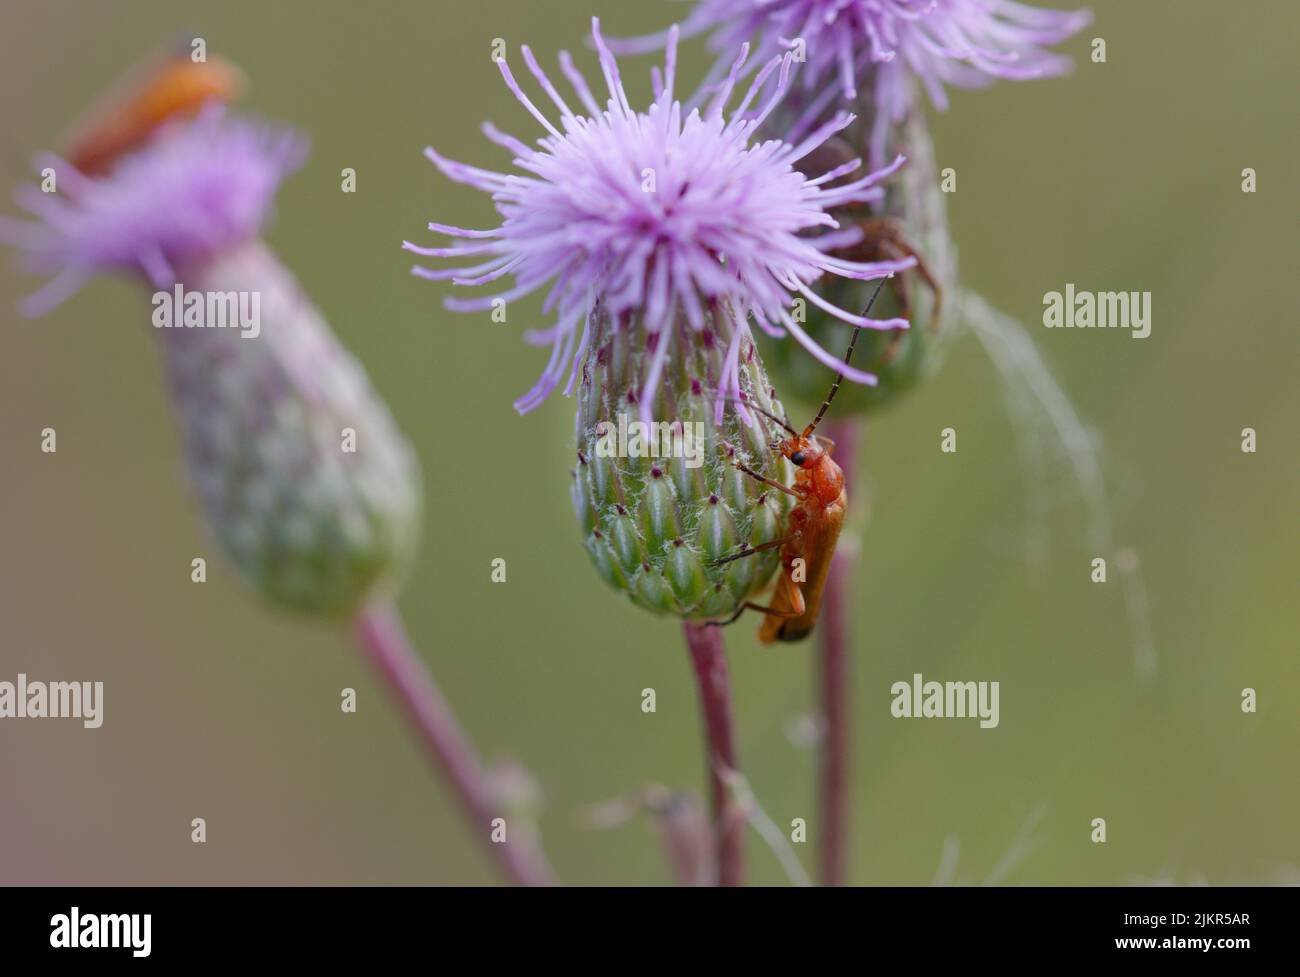 Makro photography of a wild animal on a corn flower Stock Photo